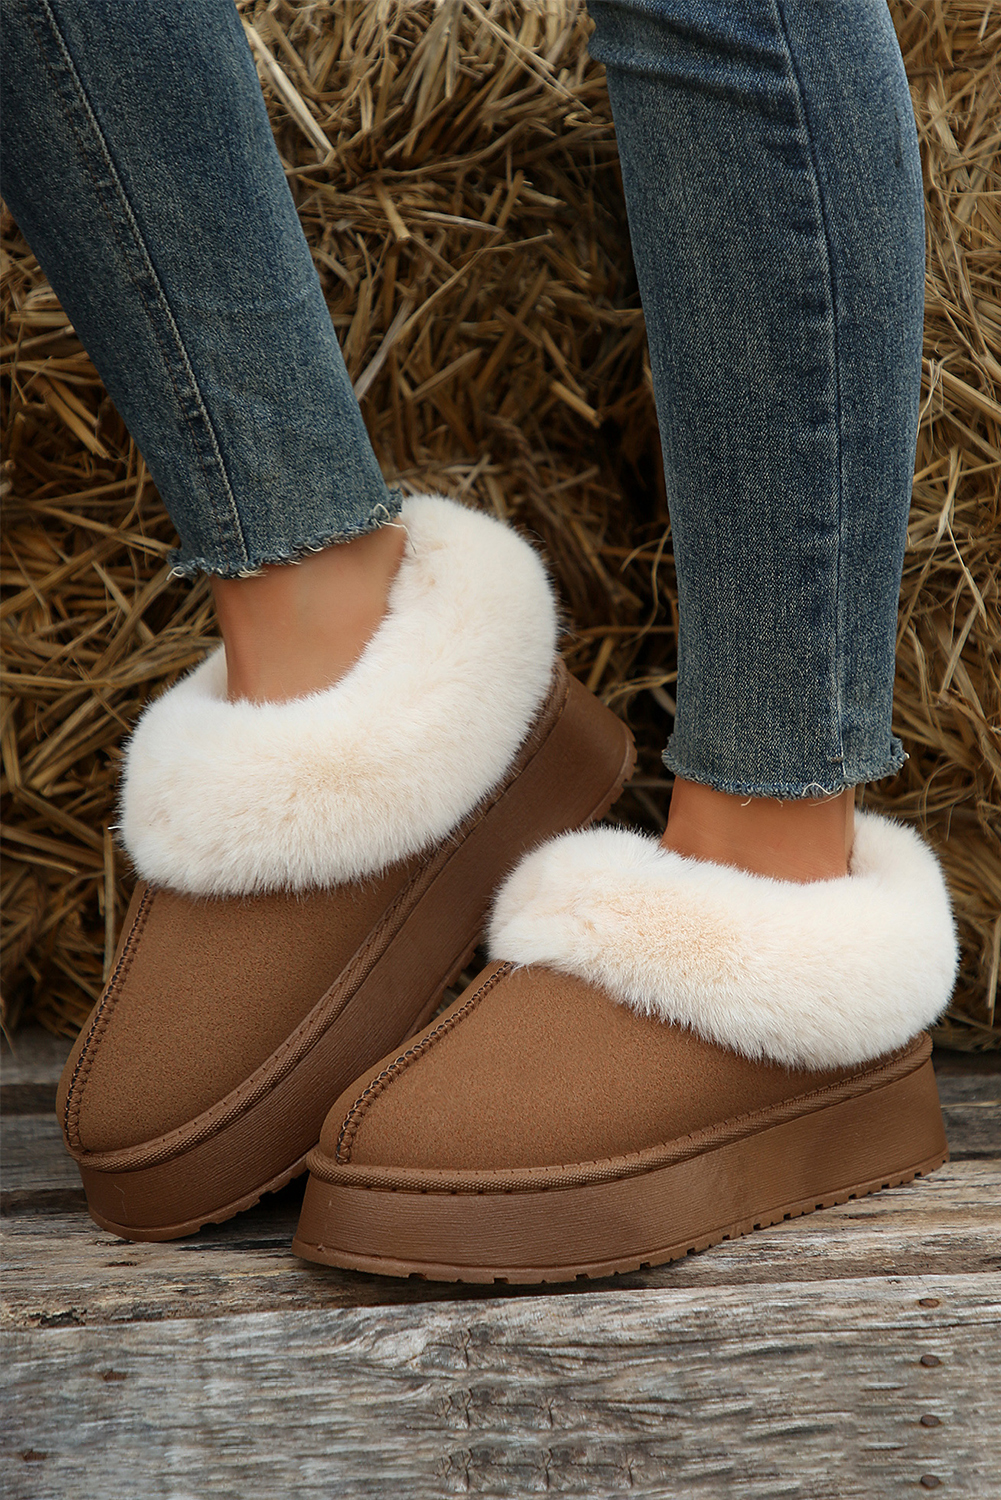 Shewin Wholesale Clothes Distributor Chestnut Plush Suede Trim Thick Sole Flat Snow BOOTS